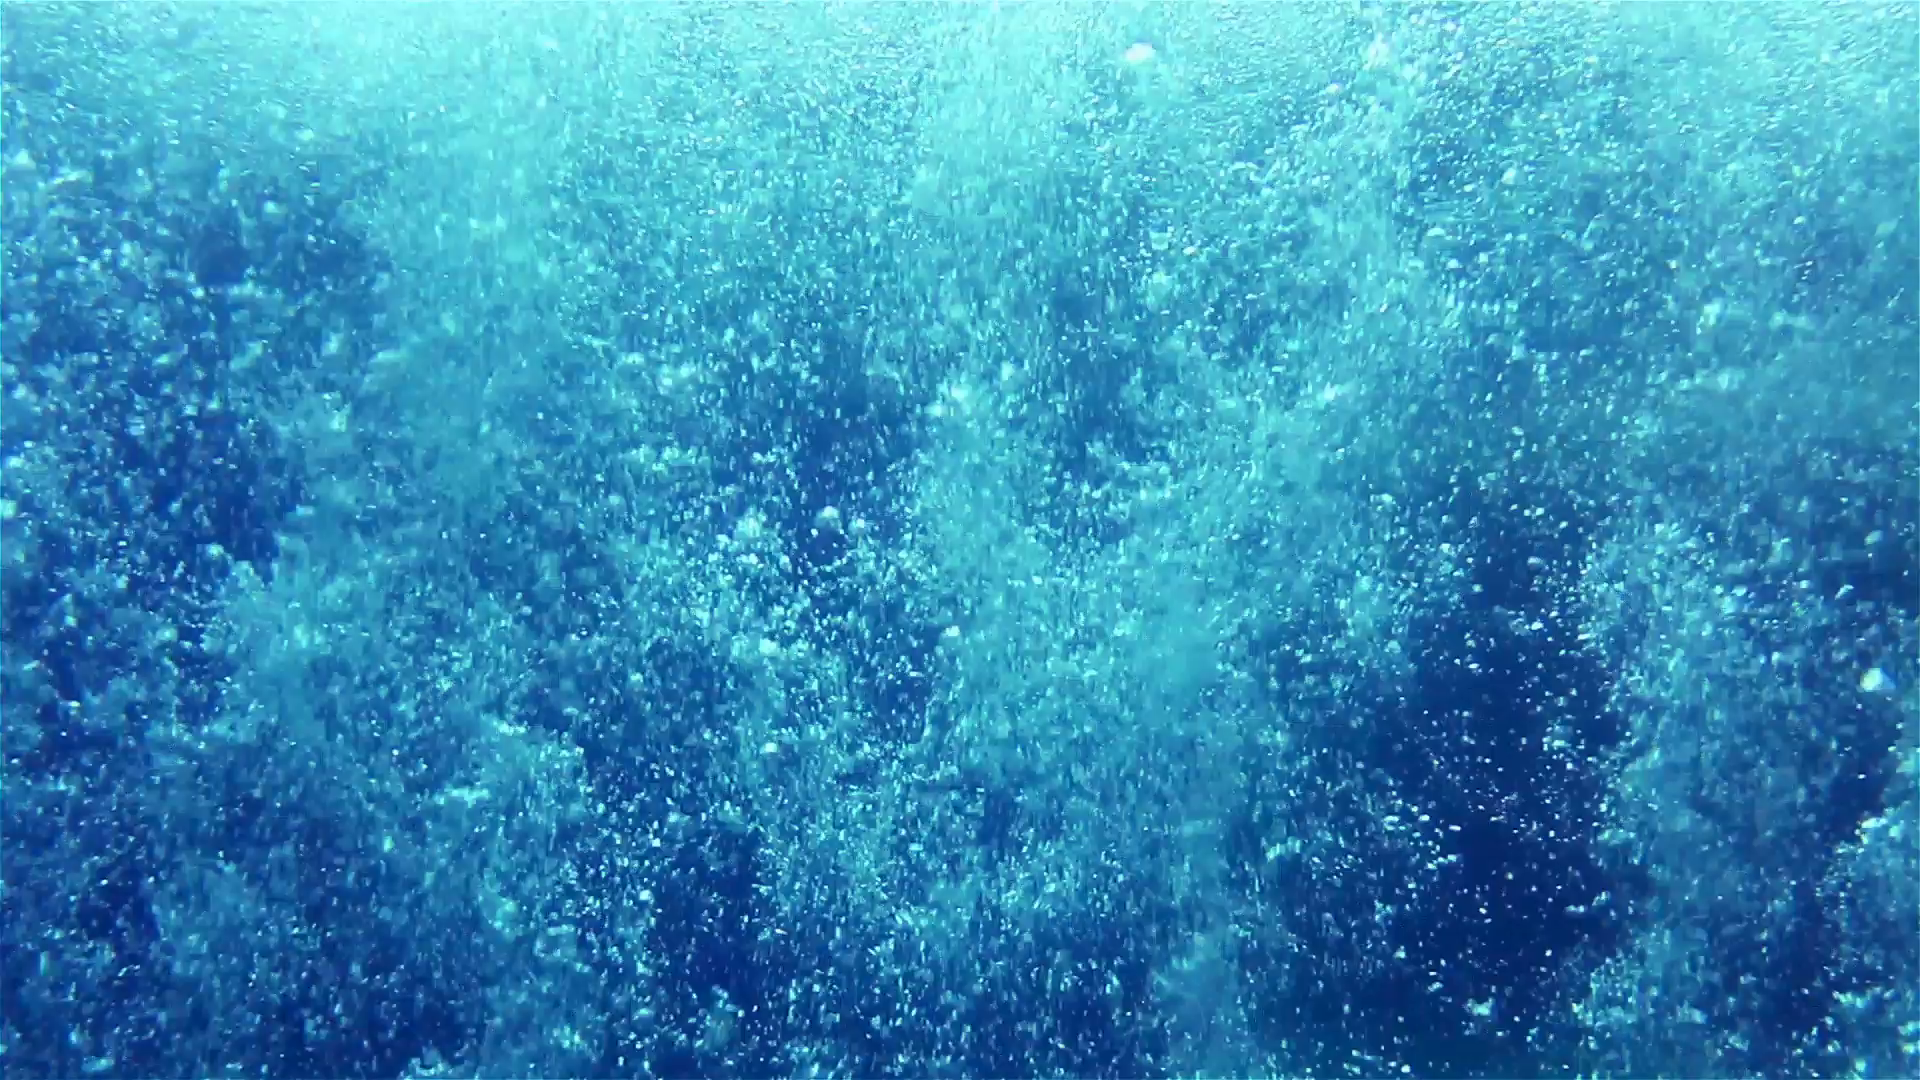 H2O water wall texture HD Stock Video Footage - Videoblocks